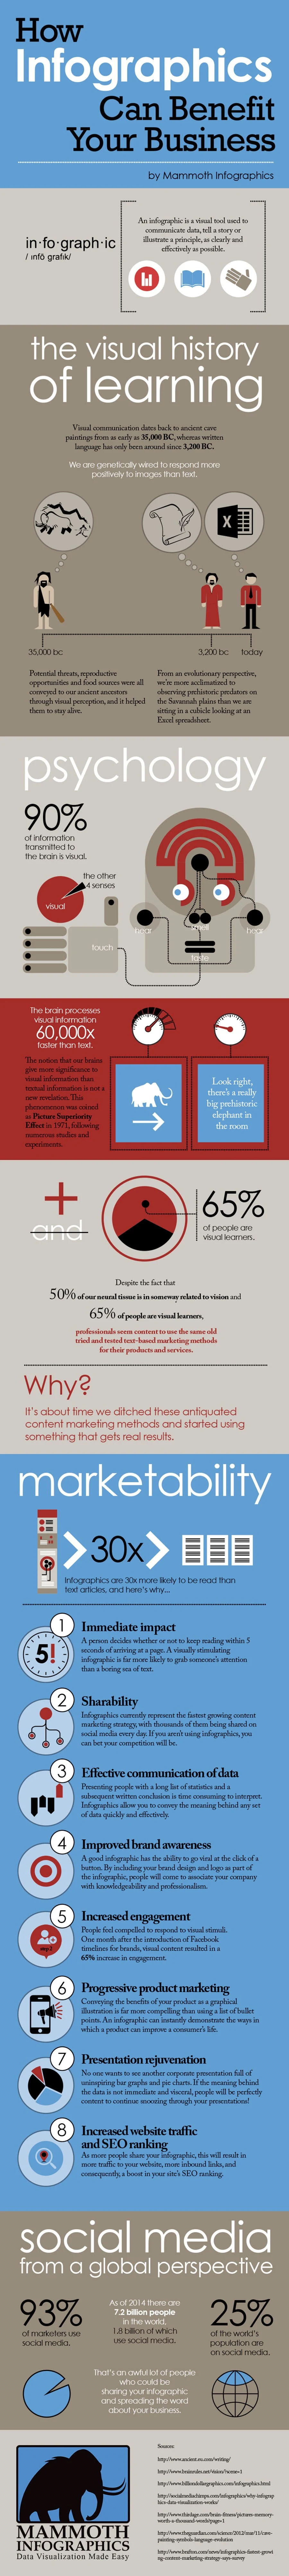 How Infographics Can Help Your Business - #infographic